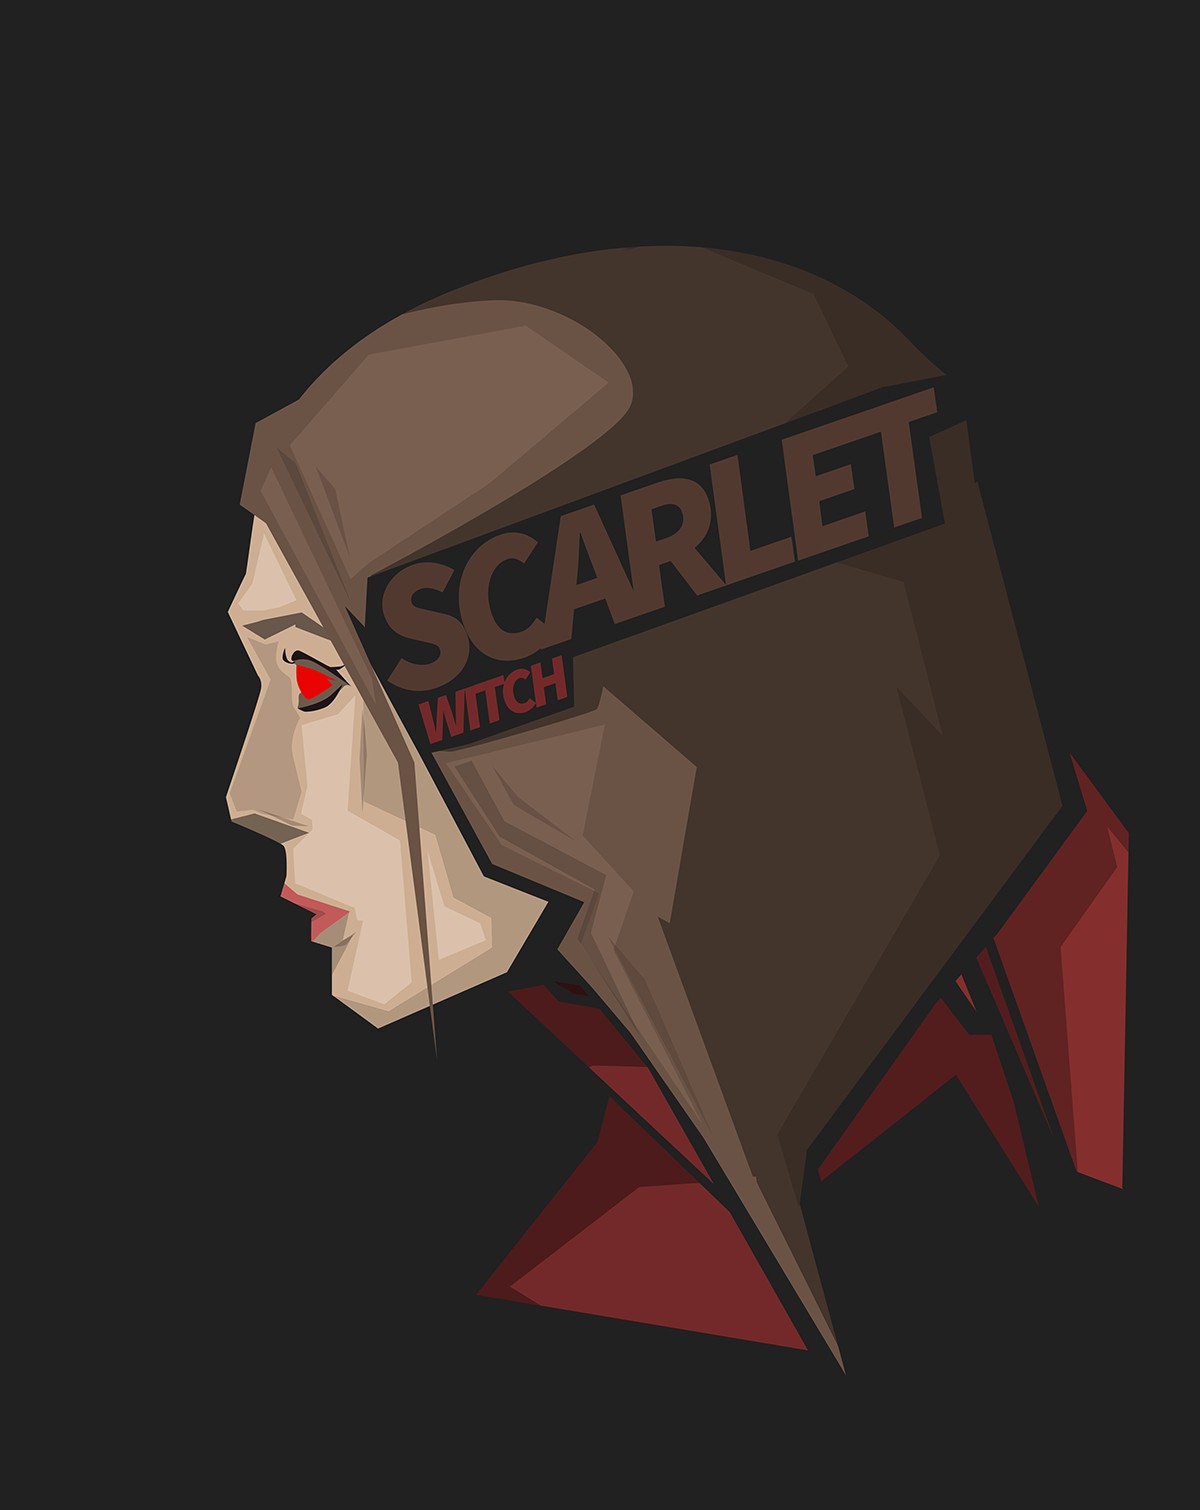 Scarlet Witch, Marvel Comics, Gray background Wallpaper